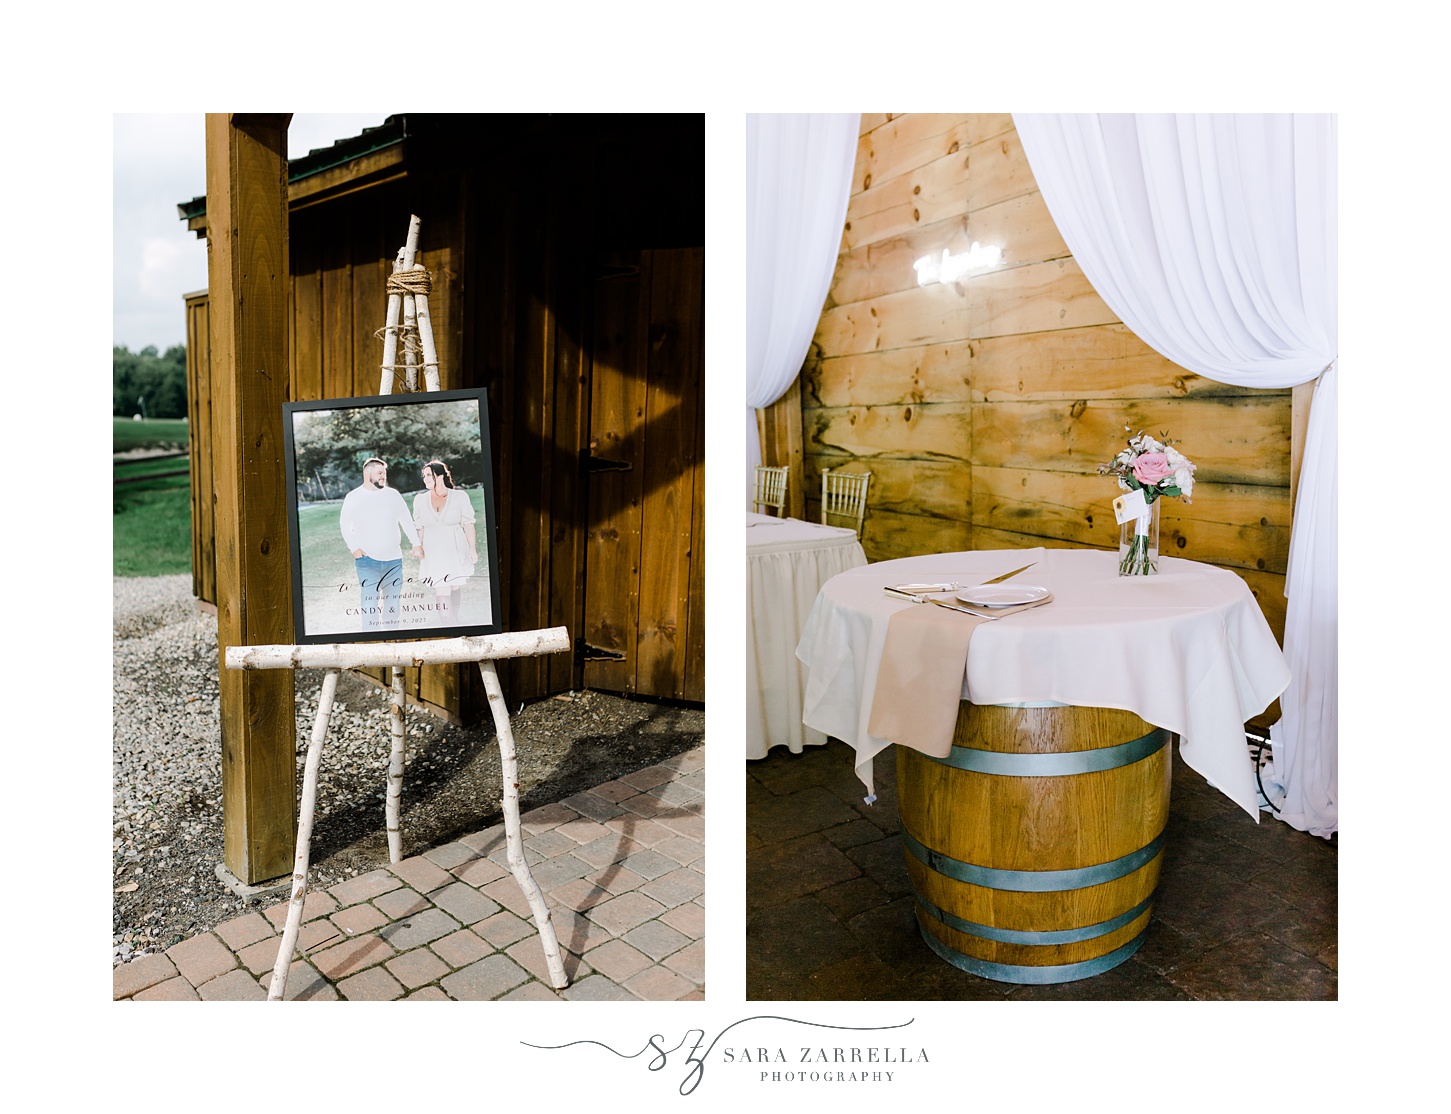 sign and wooden barrel for wedding reception in the Pavilion at Blissful Meadows